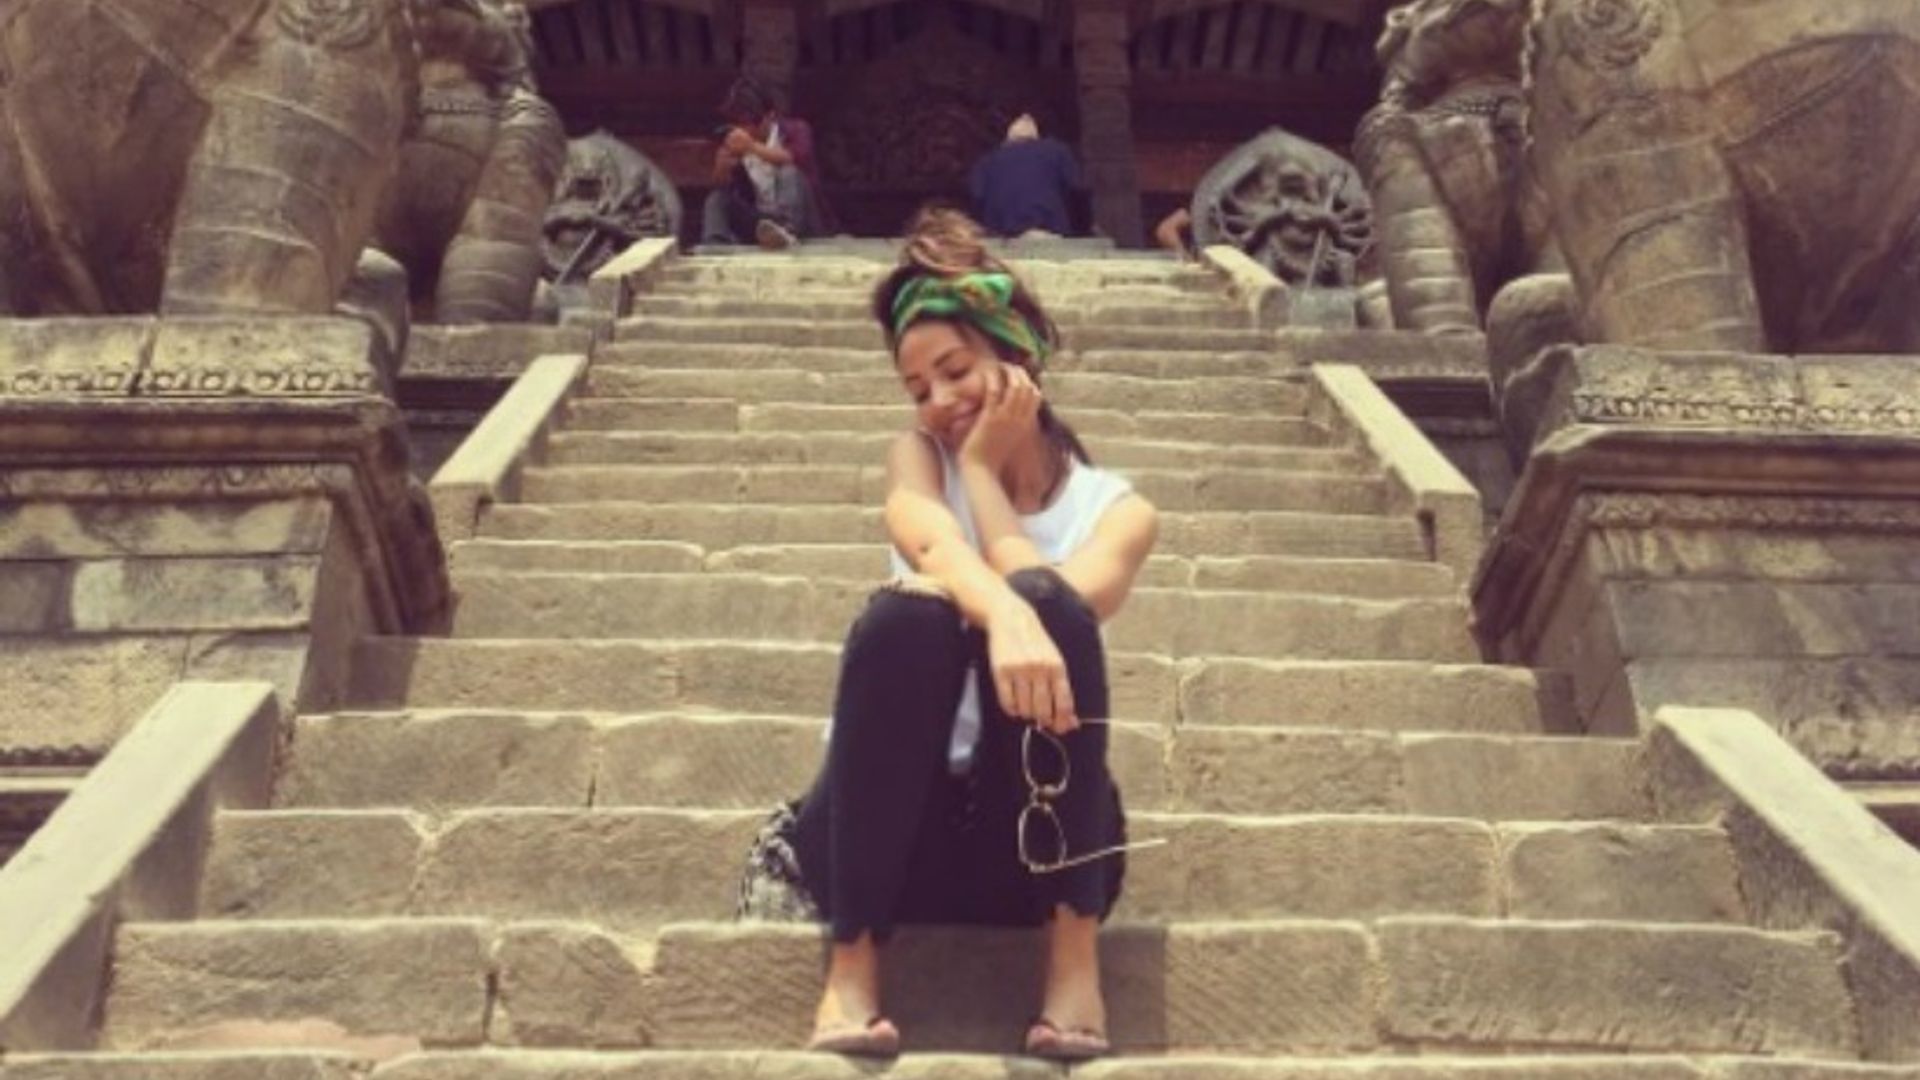 Michelle Keegan reflects on her 'eye opening' trip to Nepal after Our Girl filming